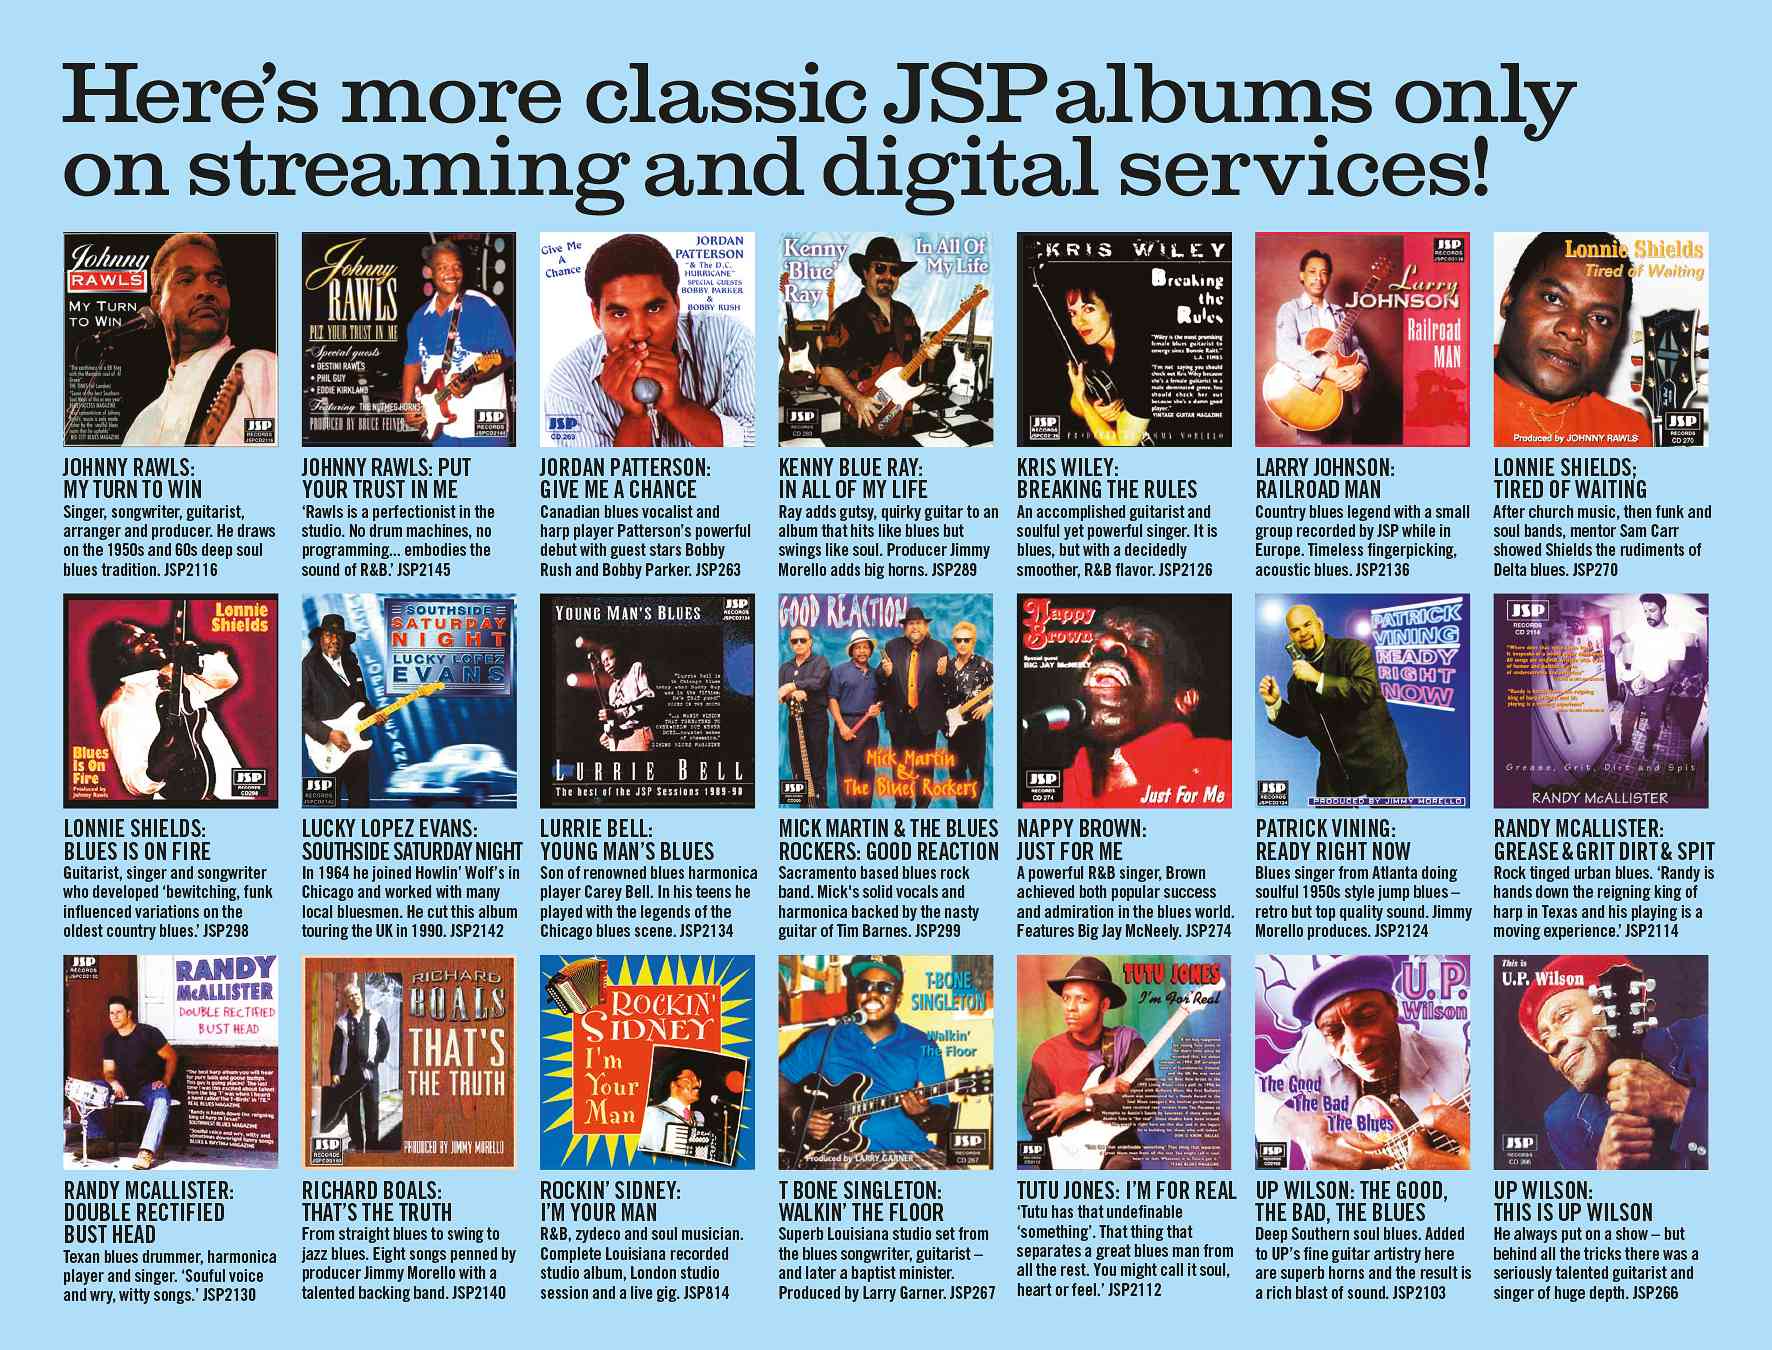 Here's More Classic JSP Albums Only On Streaming and Digital Services!